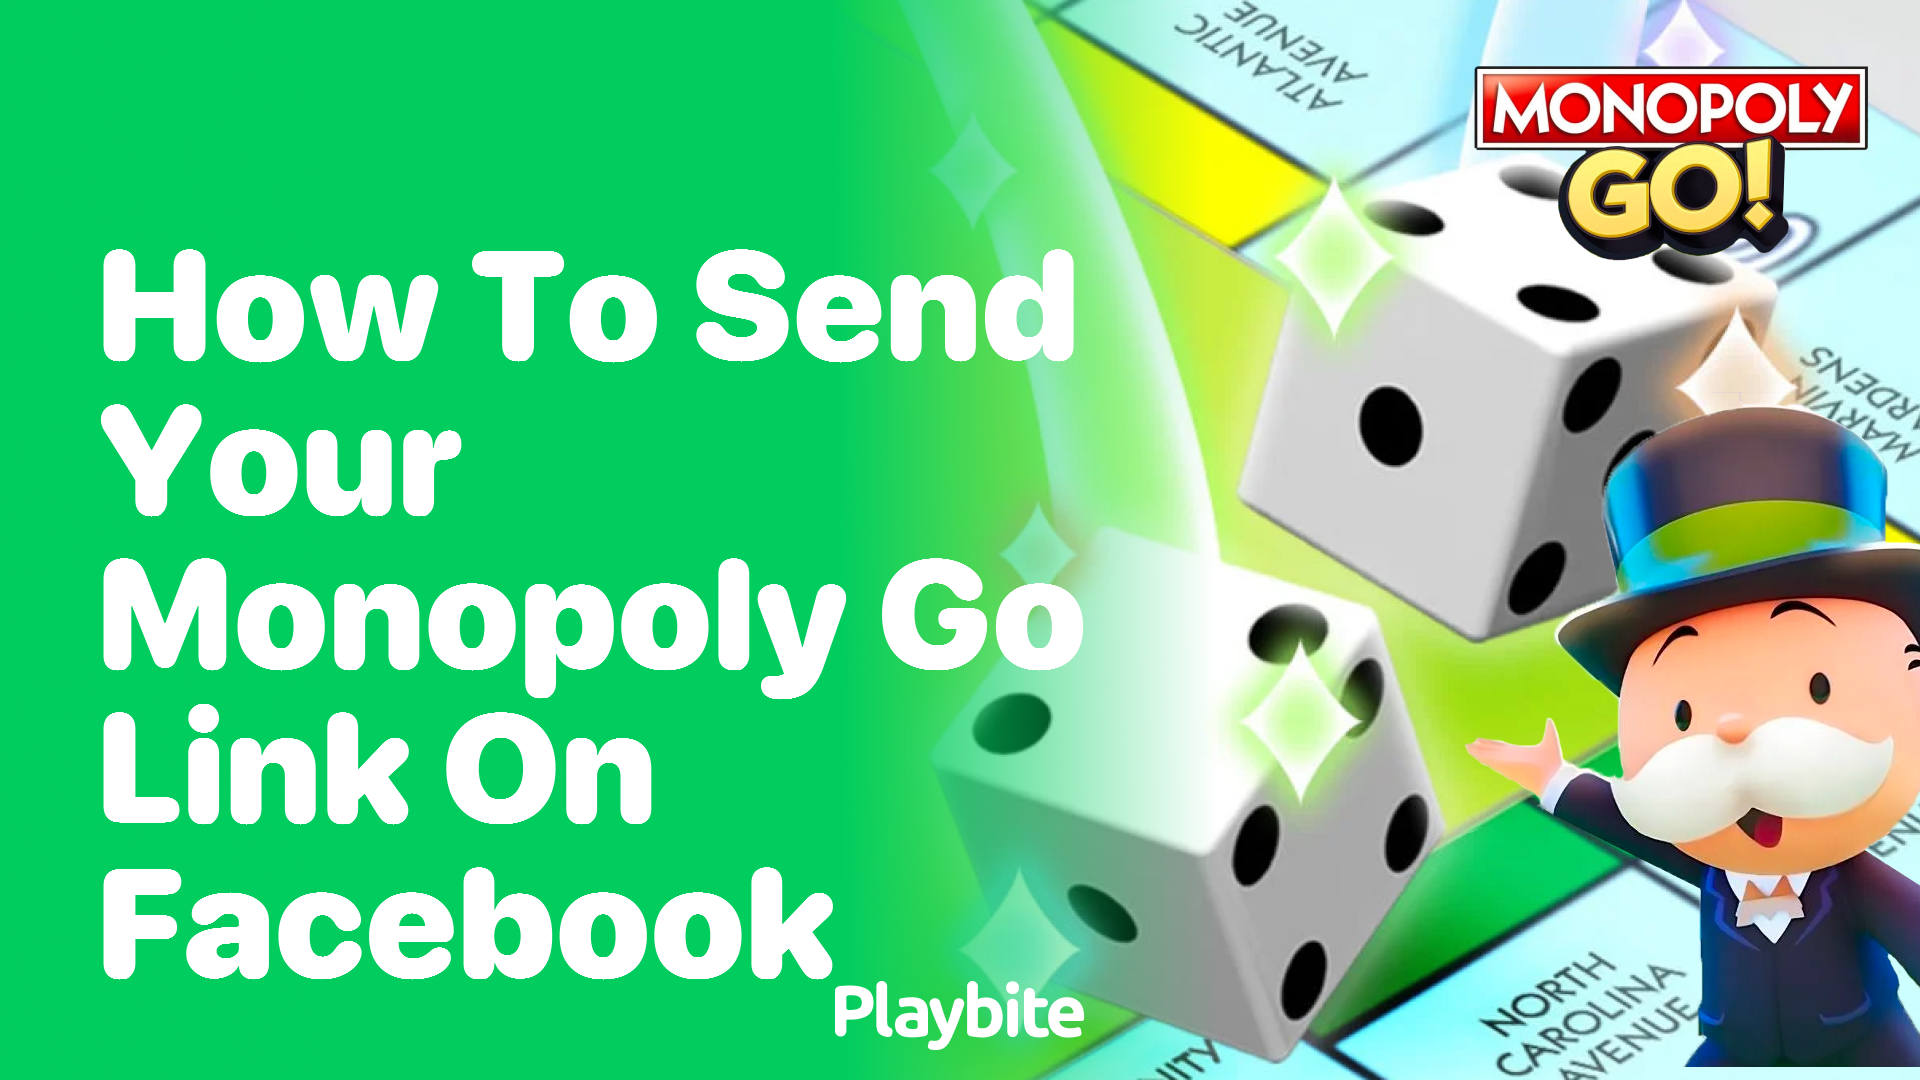 How to Send Your Monopoly Go Link on Facebook